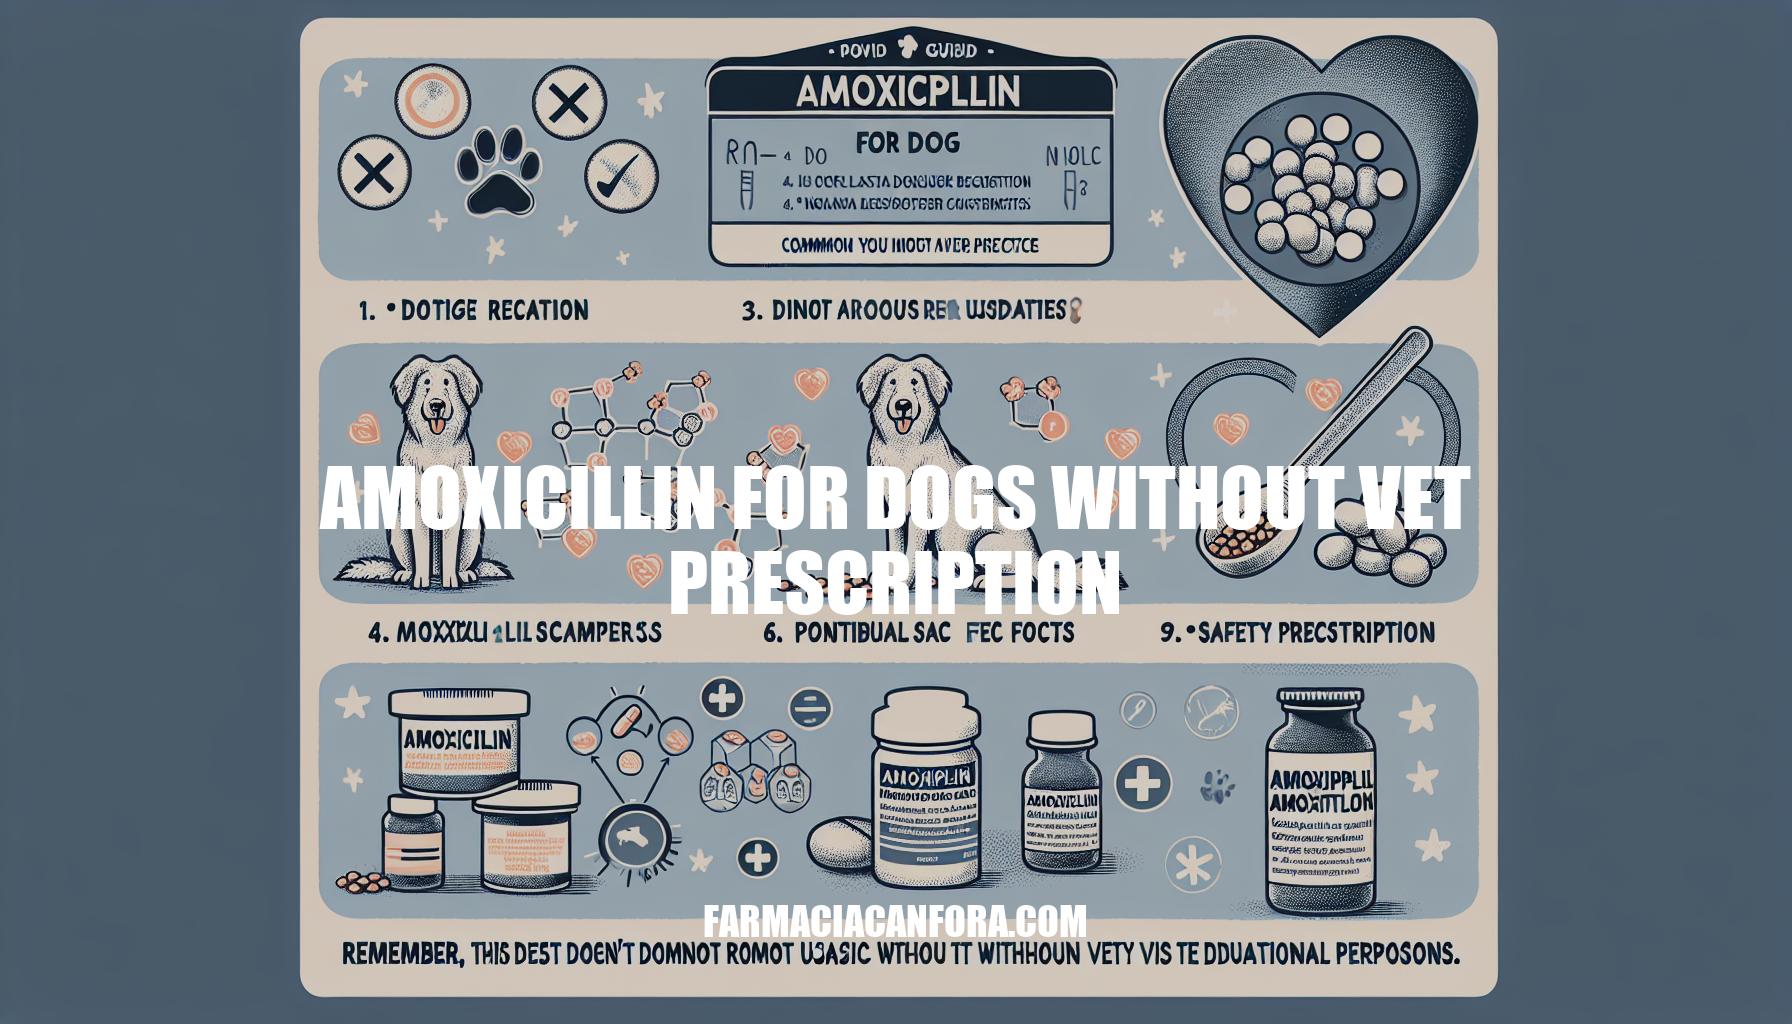 Amoxicillin for Dogs Without Vet Prescription - A Guide